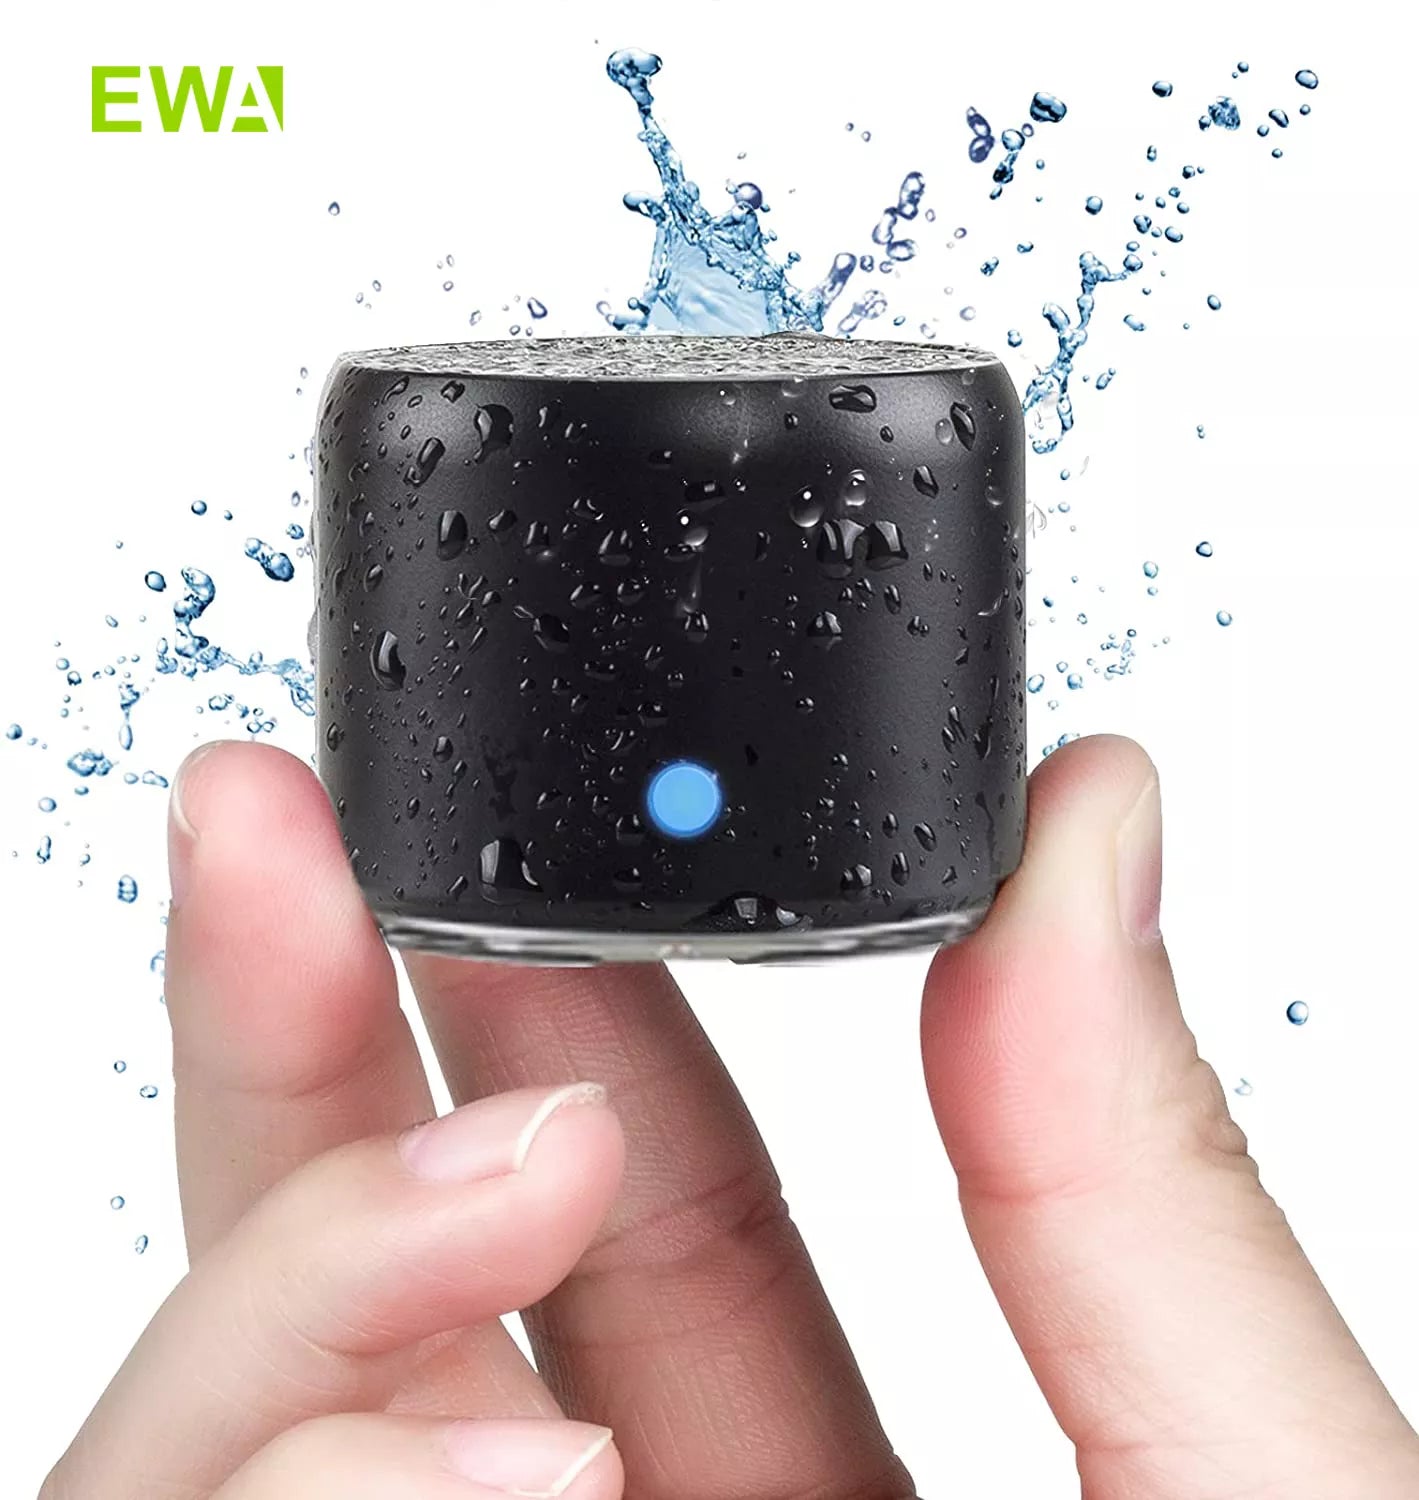 EWA A106 Pro: Mini Bluetooth Speaker with Custom Bass Radiator, IPX7 Waterproof, Super Portable Design - Complete with Travel Case for On-the-Go Enjoyment